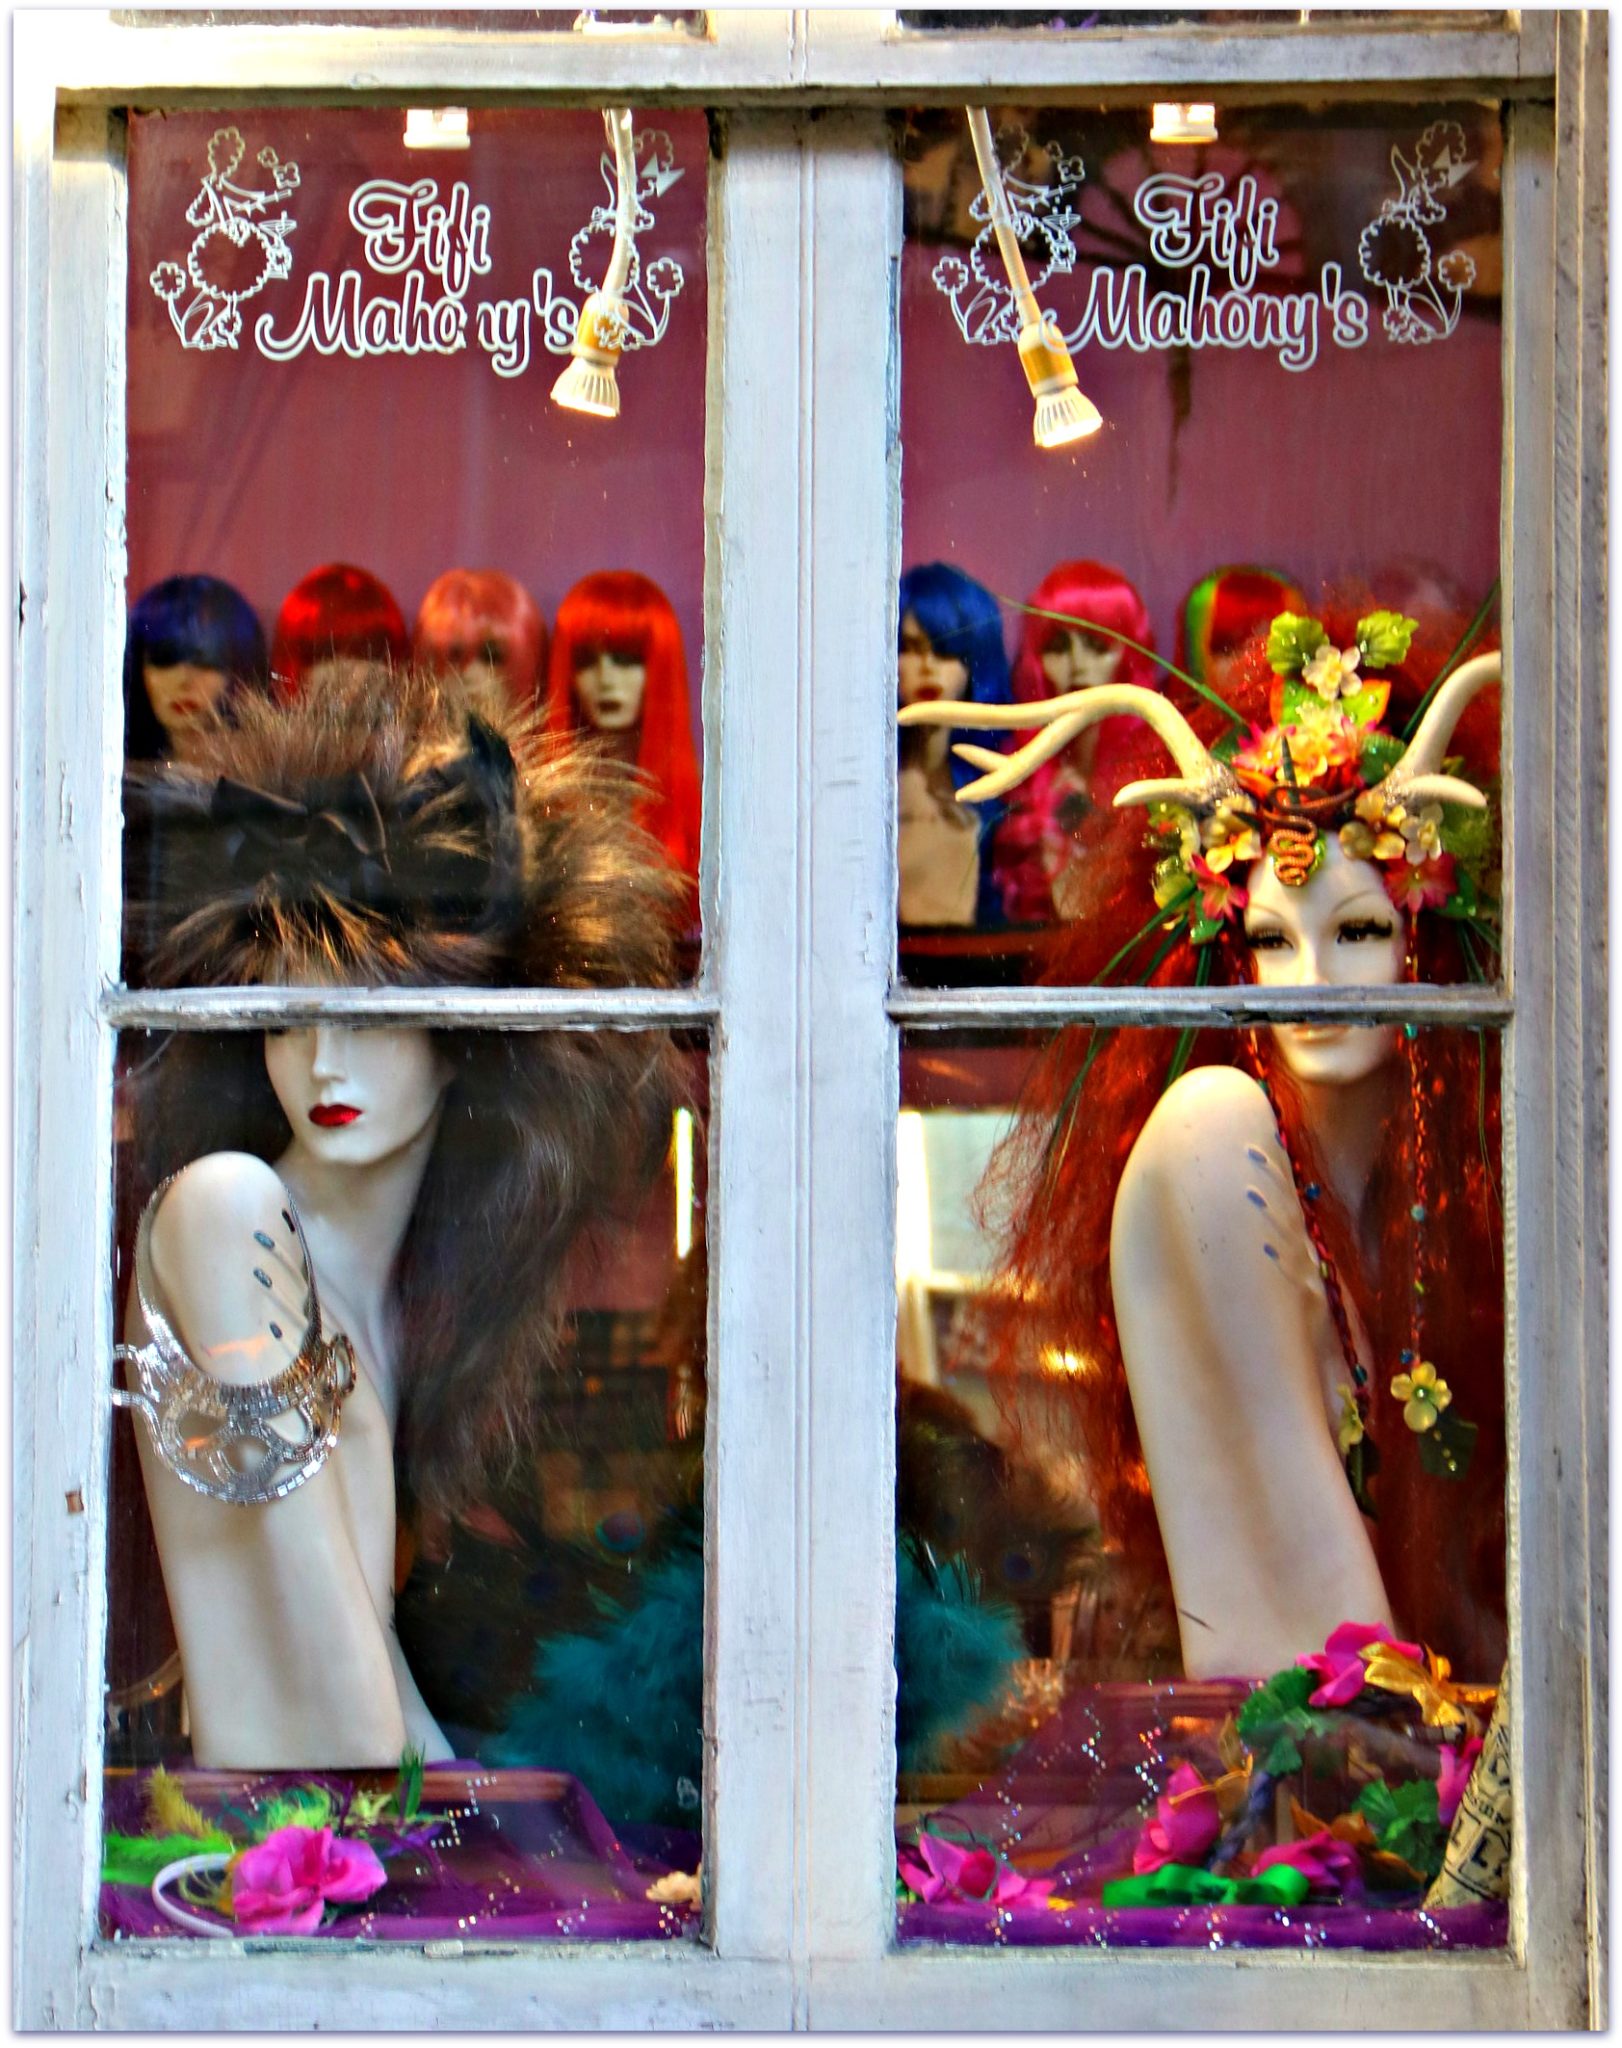 Window shopping on Royal Street in French Quarter